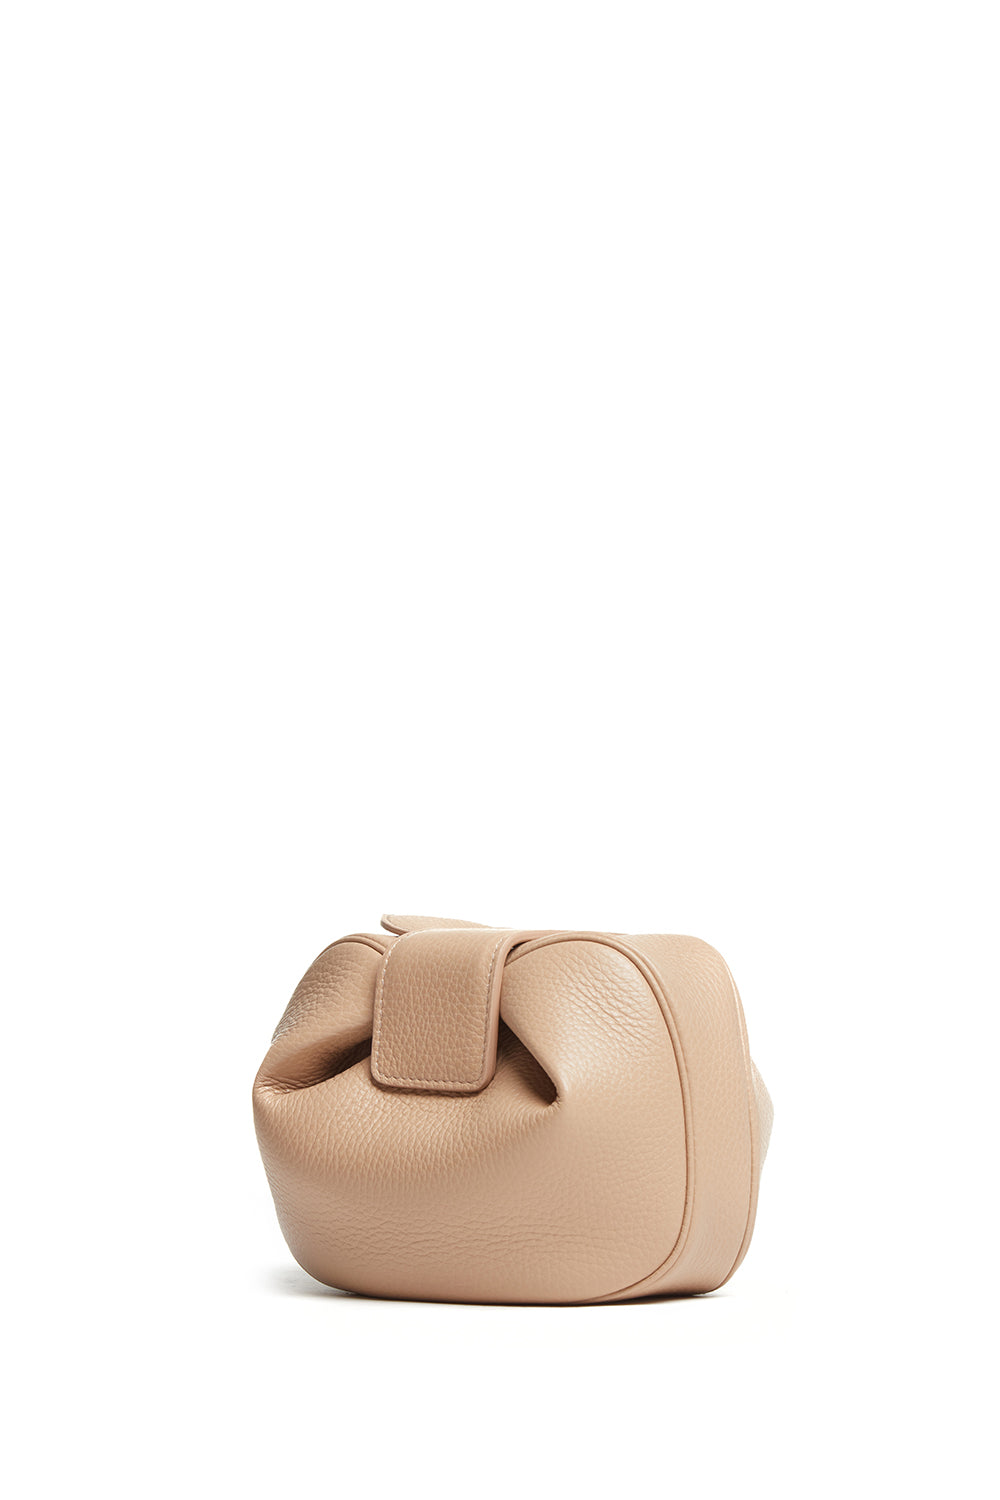 Soft Demi Clutch in Nude Leather